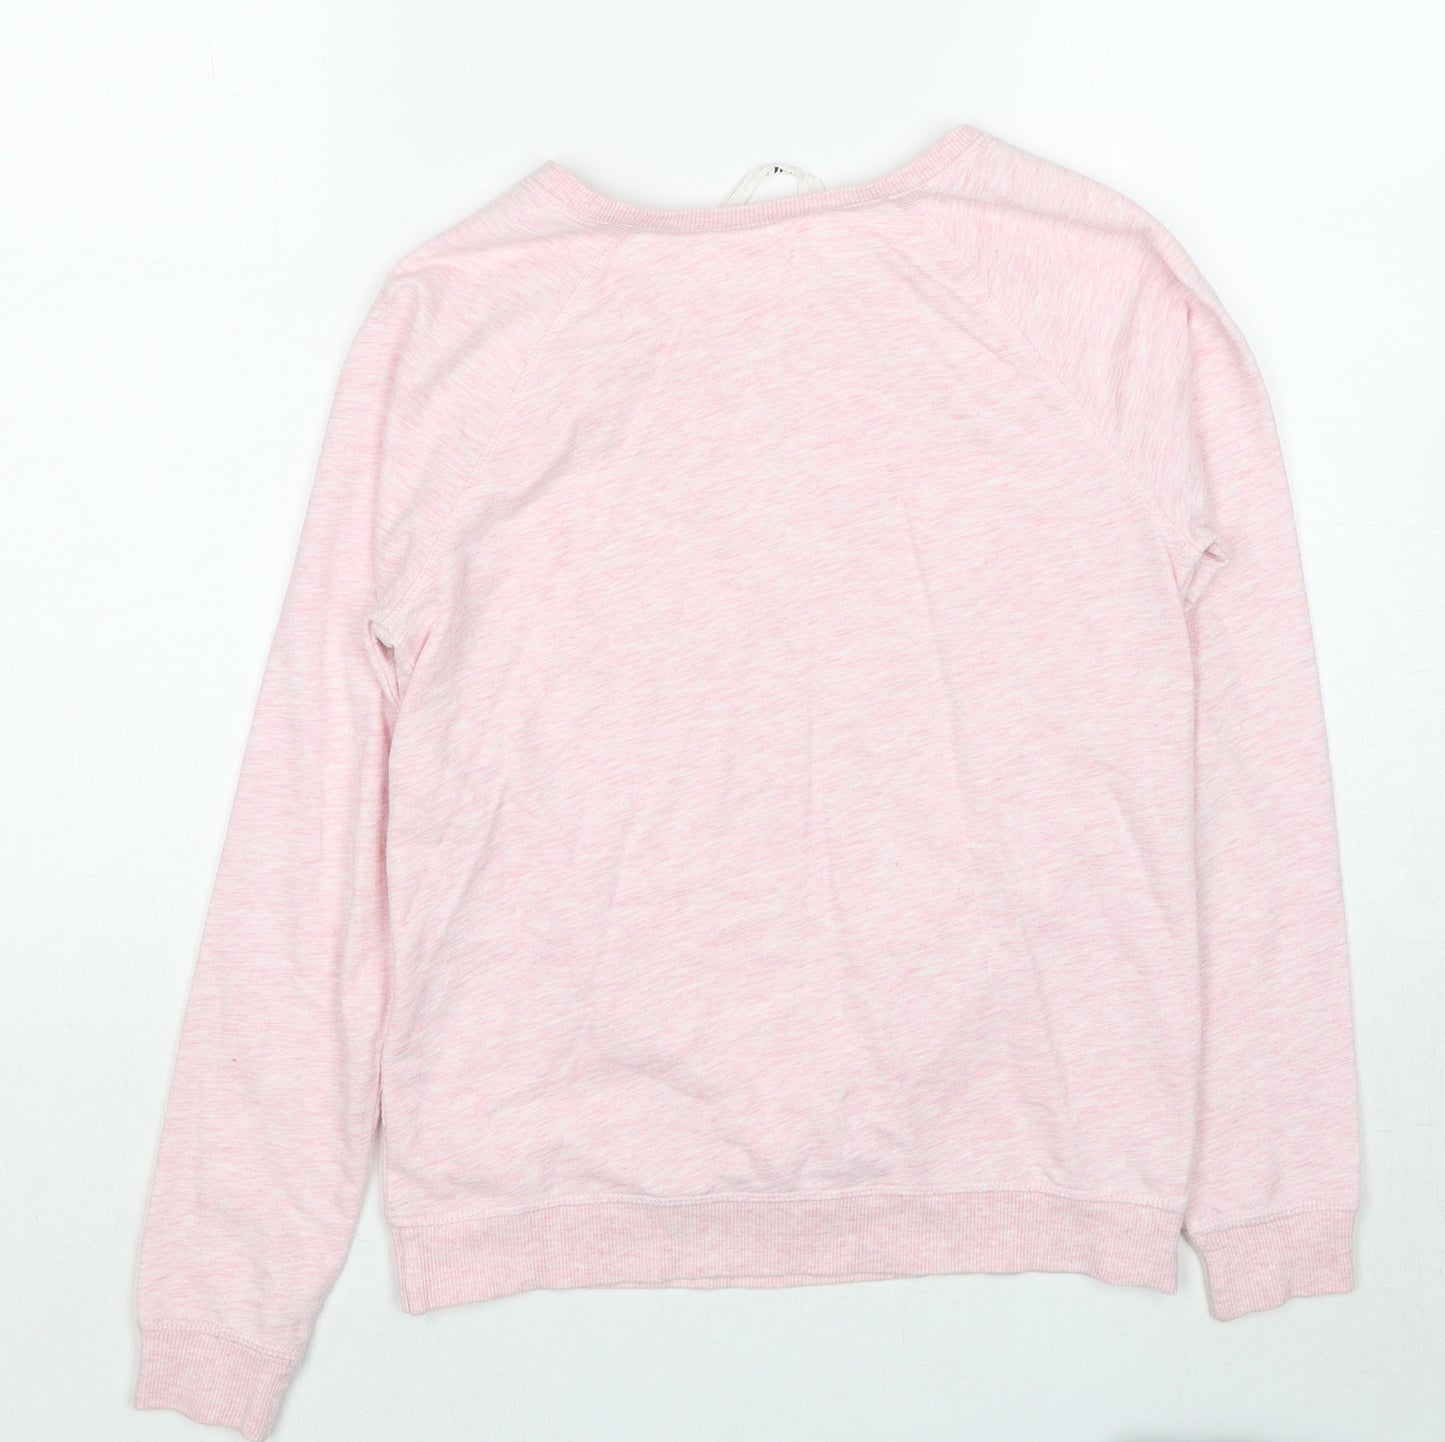 H&M Girls Pink Polyester Pullover Sweatshirt Size 12-13 Years Pullover - Age 12-14 Years